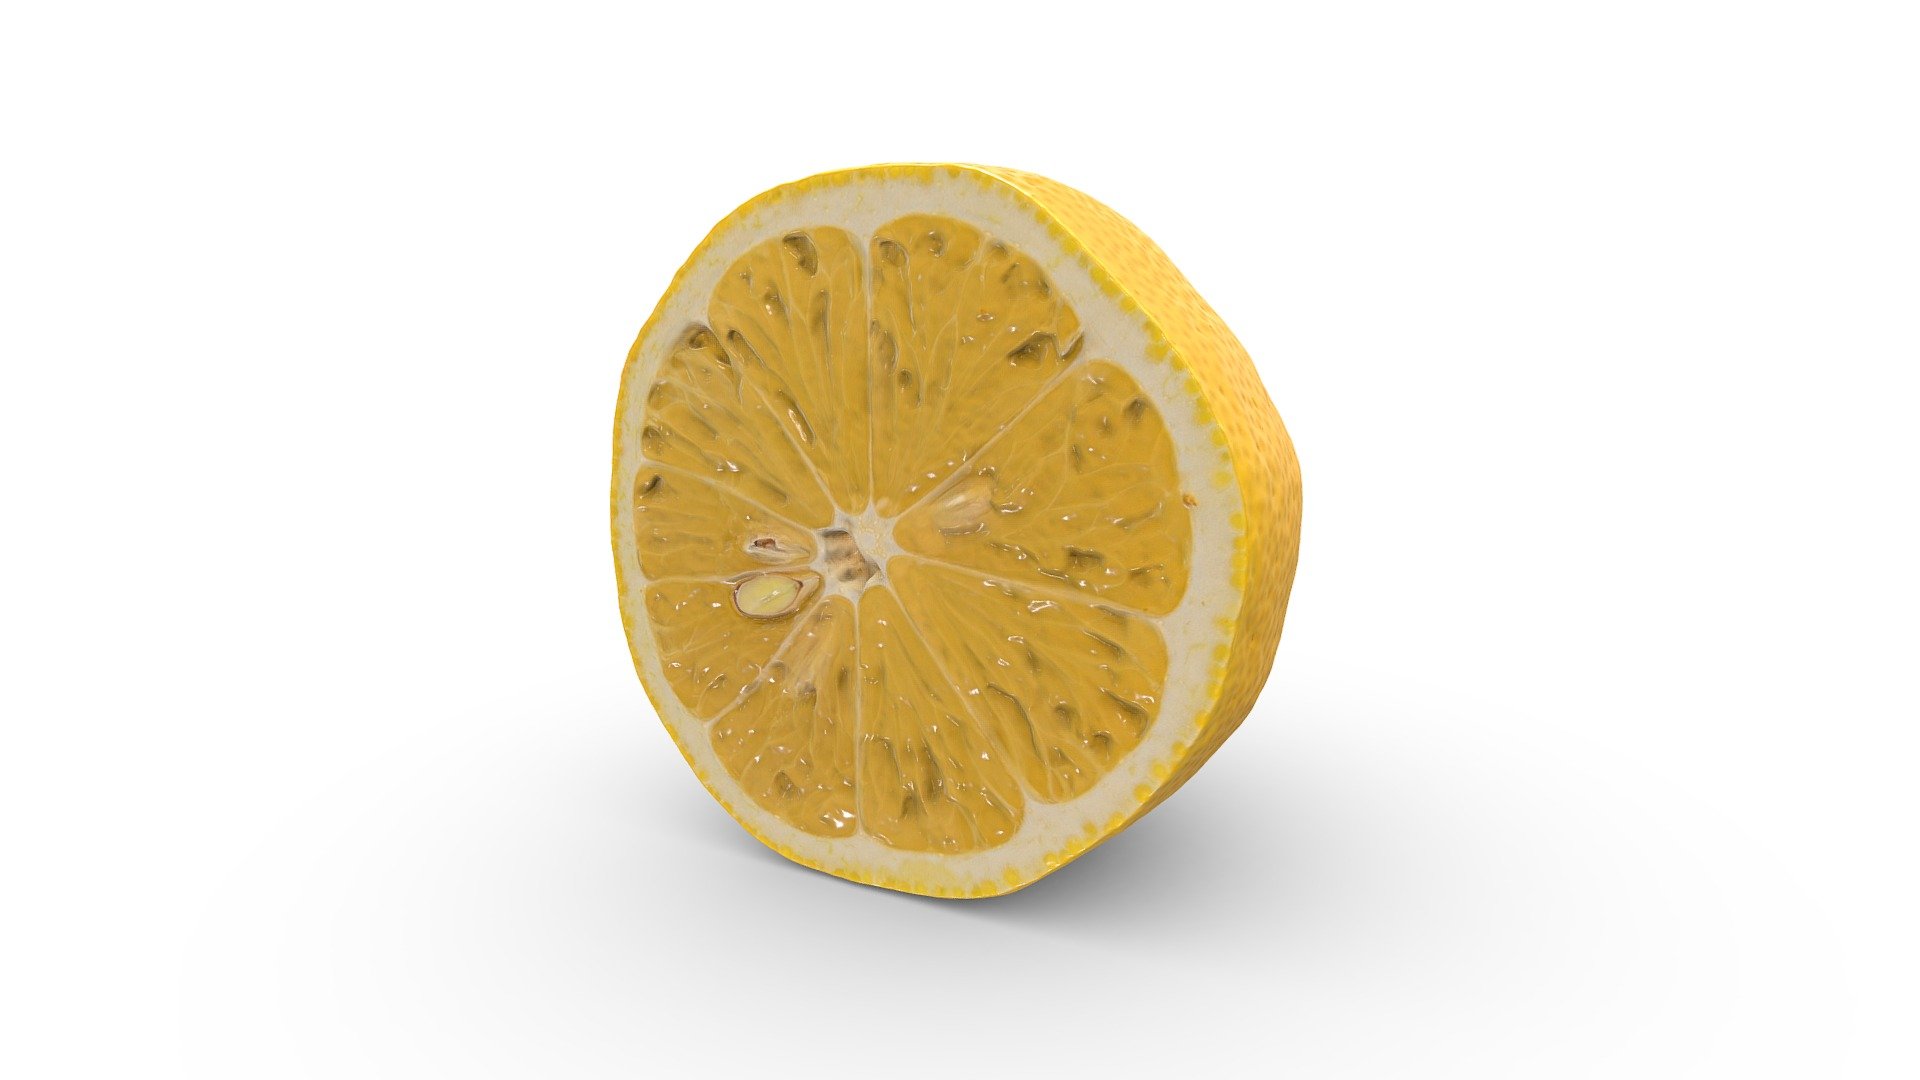 High-poly half lemon photogrammetry scan. PBR texture maps 4096x4096 px. resolution for metallic or specular workflow. Scan from real food, high-poly 3D model, 4K resolution textures.

Additional file contains source PNG &amp; JPEG texture maps and low-poly 3d model version 3d model